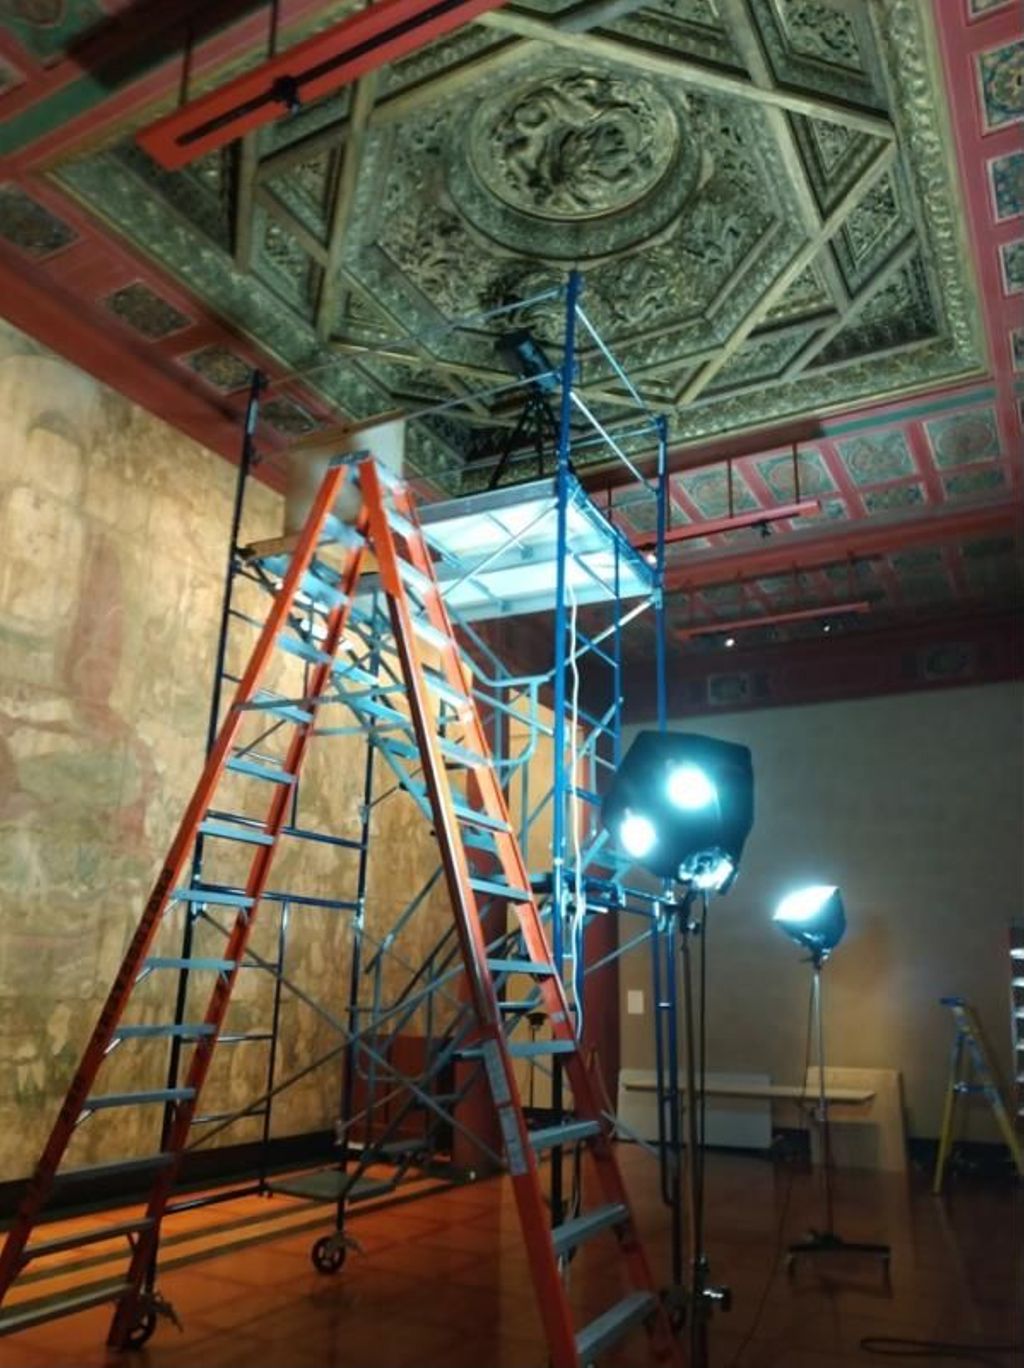 Miniature of Coffered Ceiling from Wanfo Pavilion (Wanfoge, Ten Thousand Buddhas Pavilion), research team conducting scanning